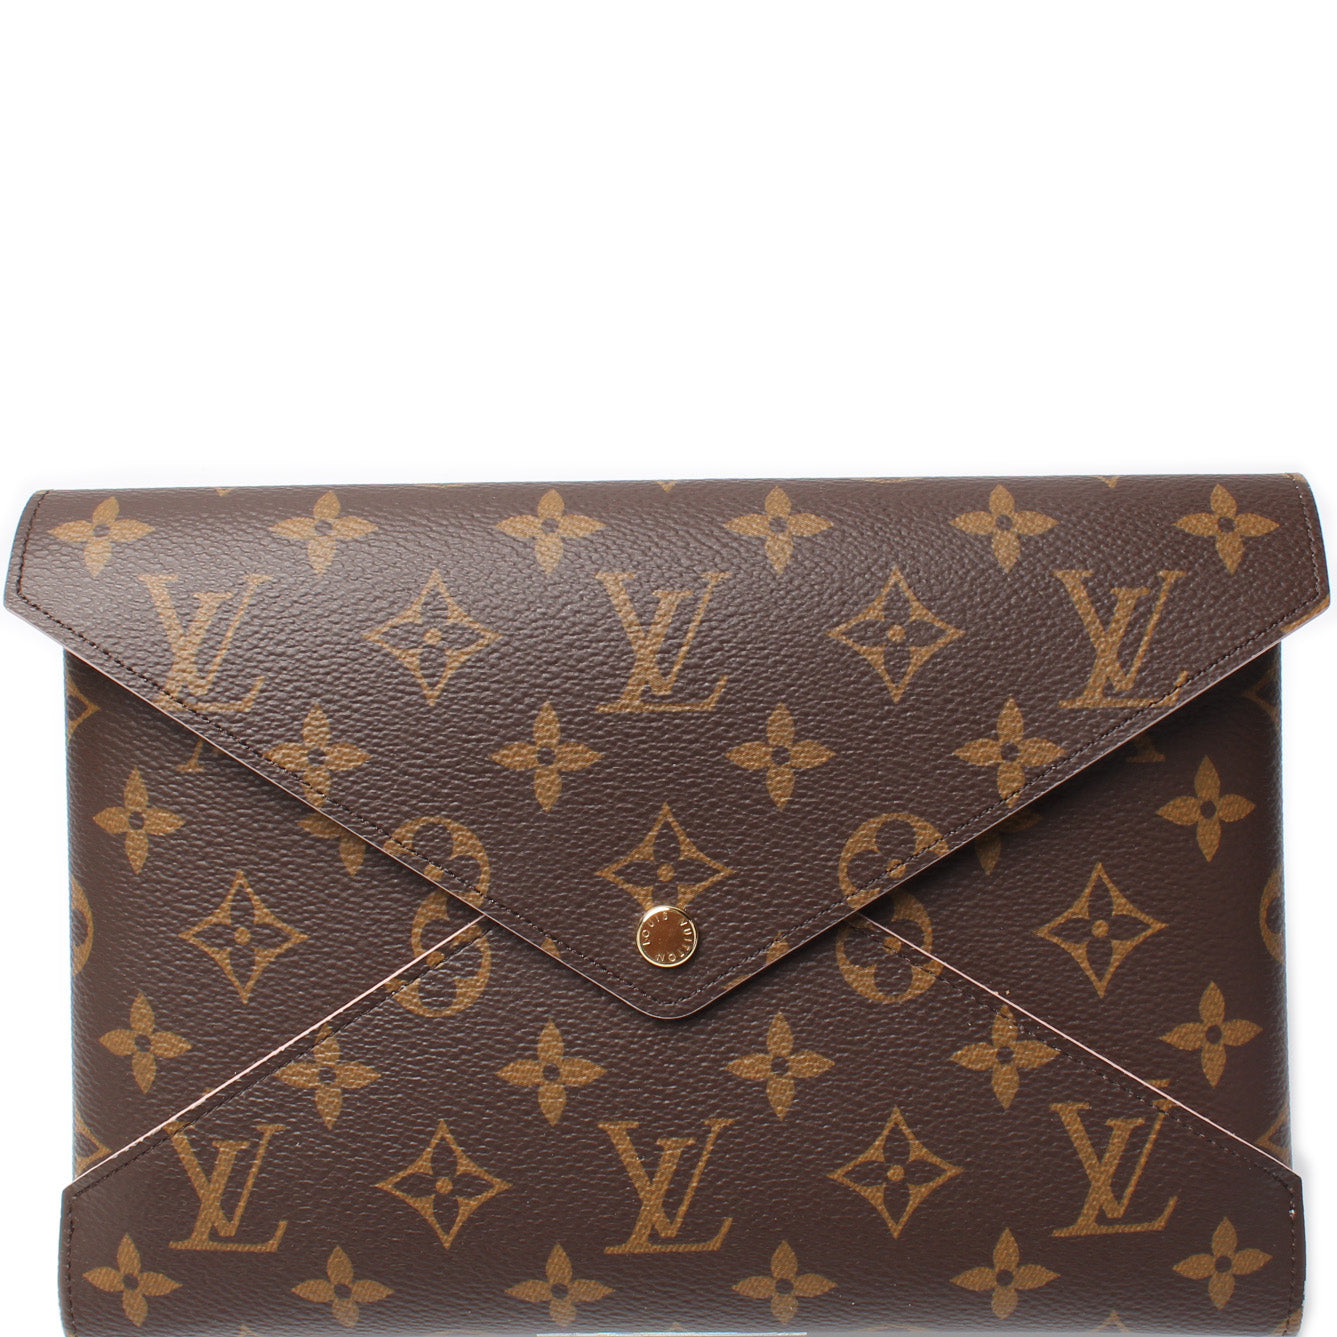 NEW Authentic Louis Vuitton Kirigami Large Pochette Pouch ~ Large ONLY